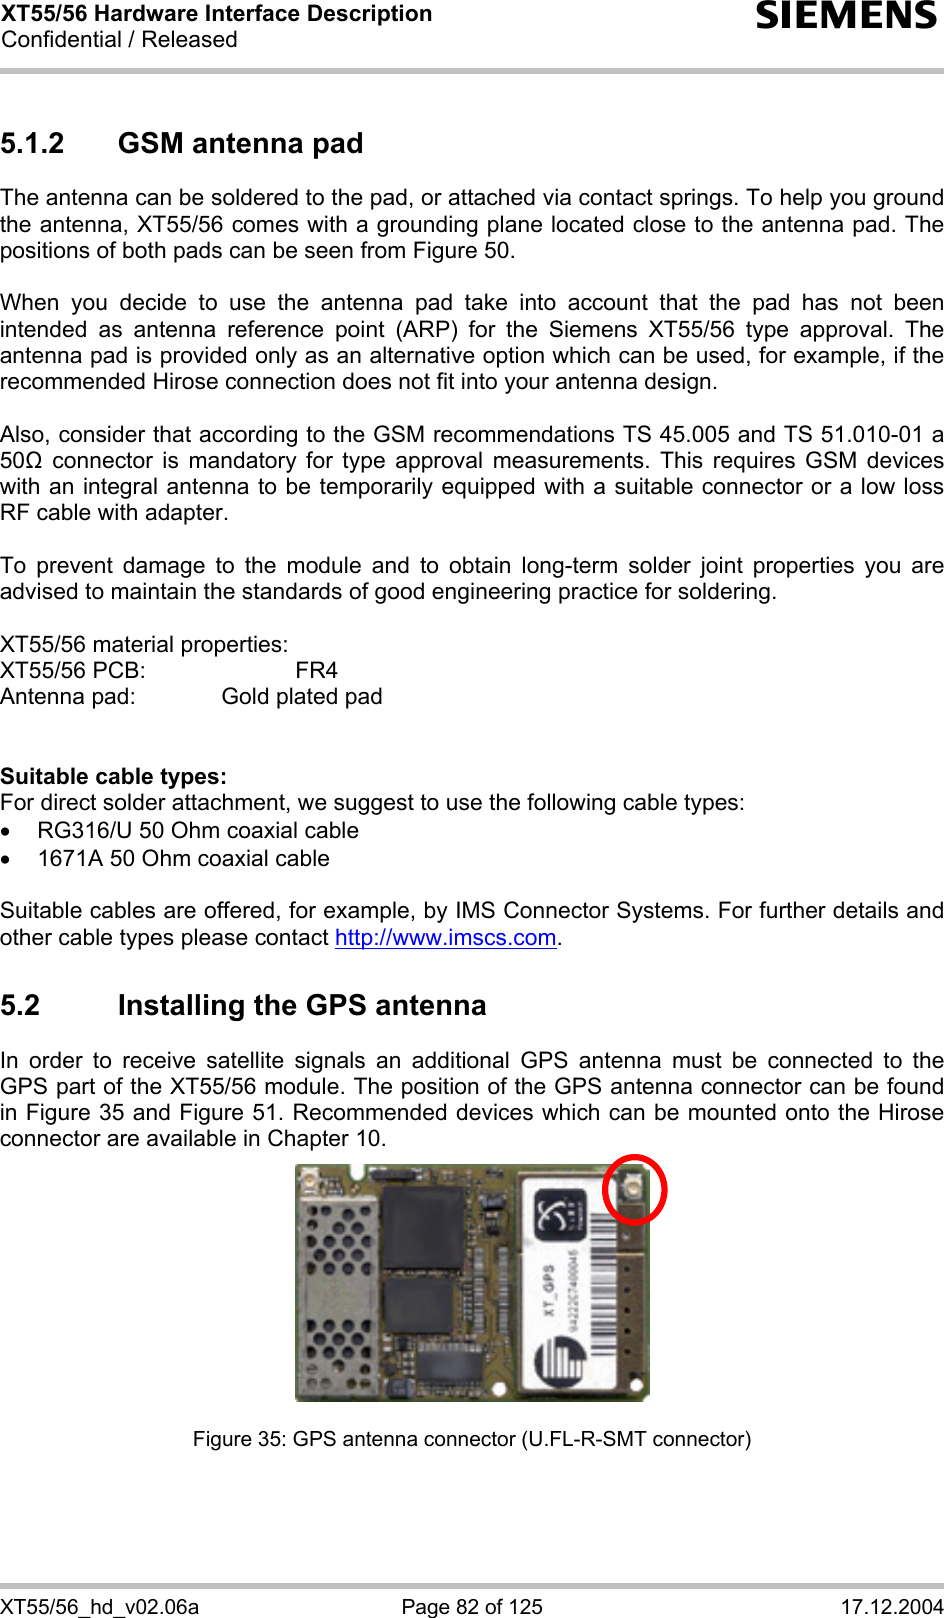 XT55/56 Hardware Interface Description Confidential / Released s XT55/56_hd_v02.06a  Page 82 of 125  17.12.2004 5.1.2  GSM antenna pad The antenna can be soldered to the pad, or attached via contact springs. To help you ground the antenna, XT55/56 comes with a grounding plane located close to the antenna pad. The positions of both pads can be seen from Figure 50.  When you decide to use the antenna pad take into account that the pad has not been intended as antenna reference point (ARP) for the Siemens XT55/56 type approval. The antenna pad is provided only as an alternative option which can be used, for example, if the recommended Hirose connection does not fit into your antenna design.   Also, consider that according to the GSM recommendations TS 45.005 and TS 51.010-01 a 50 connector is mandatory for type approval measurements. This requires GSM devices with an integral antenna to be temporarily equipped with a suitable connector or a low loss RF cable with adapter.   To prevent damage to the module and to obtain long-term solder joint properties you are advised to maintain the standards of good engineering practice for soldering.  XT55/56 material properties: XT55/56 PCB:     FR4 Antenna pad:    Gold plated pad   Suitable cable types: For direct solder attachment, we suggest to use the following cable types: •  RG316/U 50 Ohm coaxial cable  •  1671A 50 Ohm coaxial cable  Suitable cables are offered, for example, by IMS Connector Systems. For further details and other cable types please contact http://www.imscs.com. 5.2  Installing the GPS antenna In order to receive satellite signals an additional GPS antenna must be connected to the GPS part of the XT55/56 module. The position of the GPS antenna connector can be found in Figure 35 and Figure 51. Recommended devices which can be mounted onto the Hirose connector are available in Chapter 10.        Figure 35: GPS antenna connector (U.FL-R-SMT connector) 